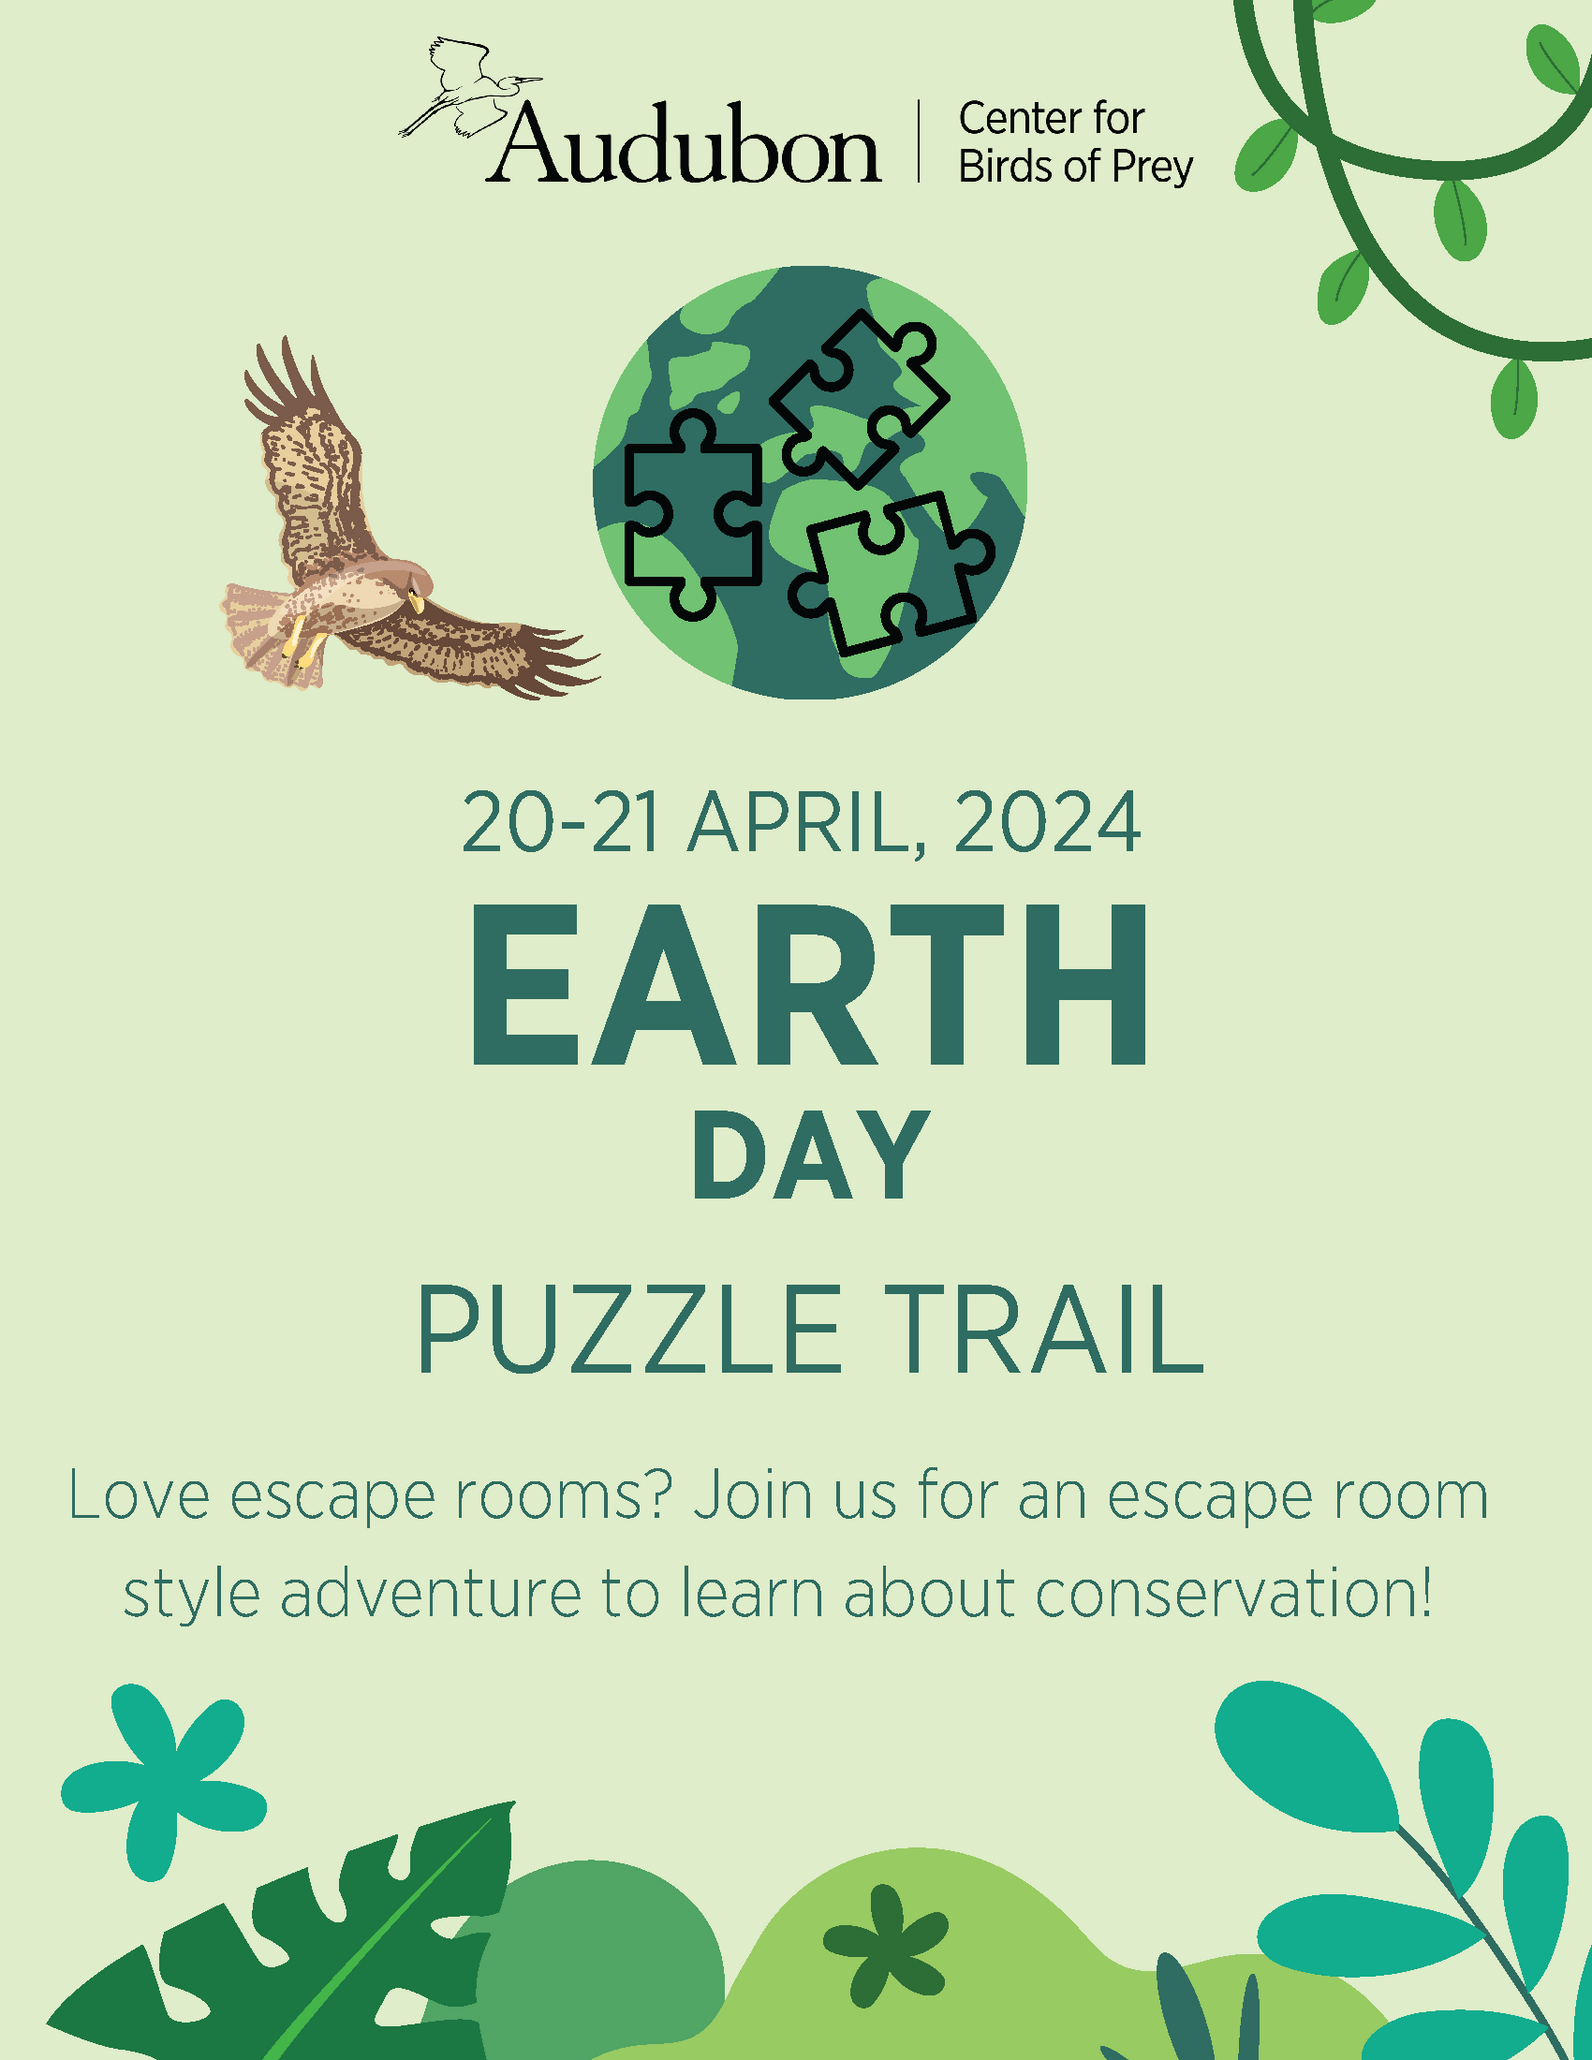 flyer for earth day puzzle trail featuring a puzzle icon